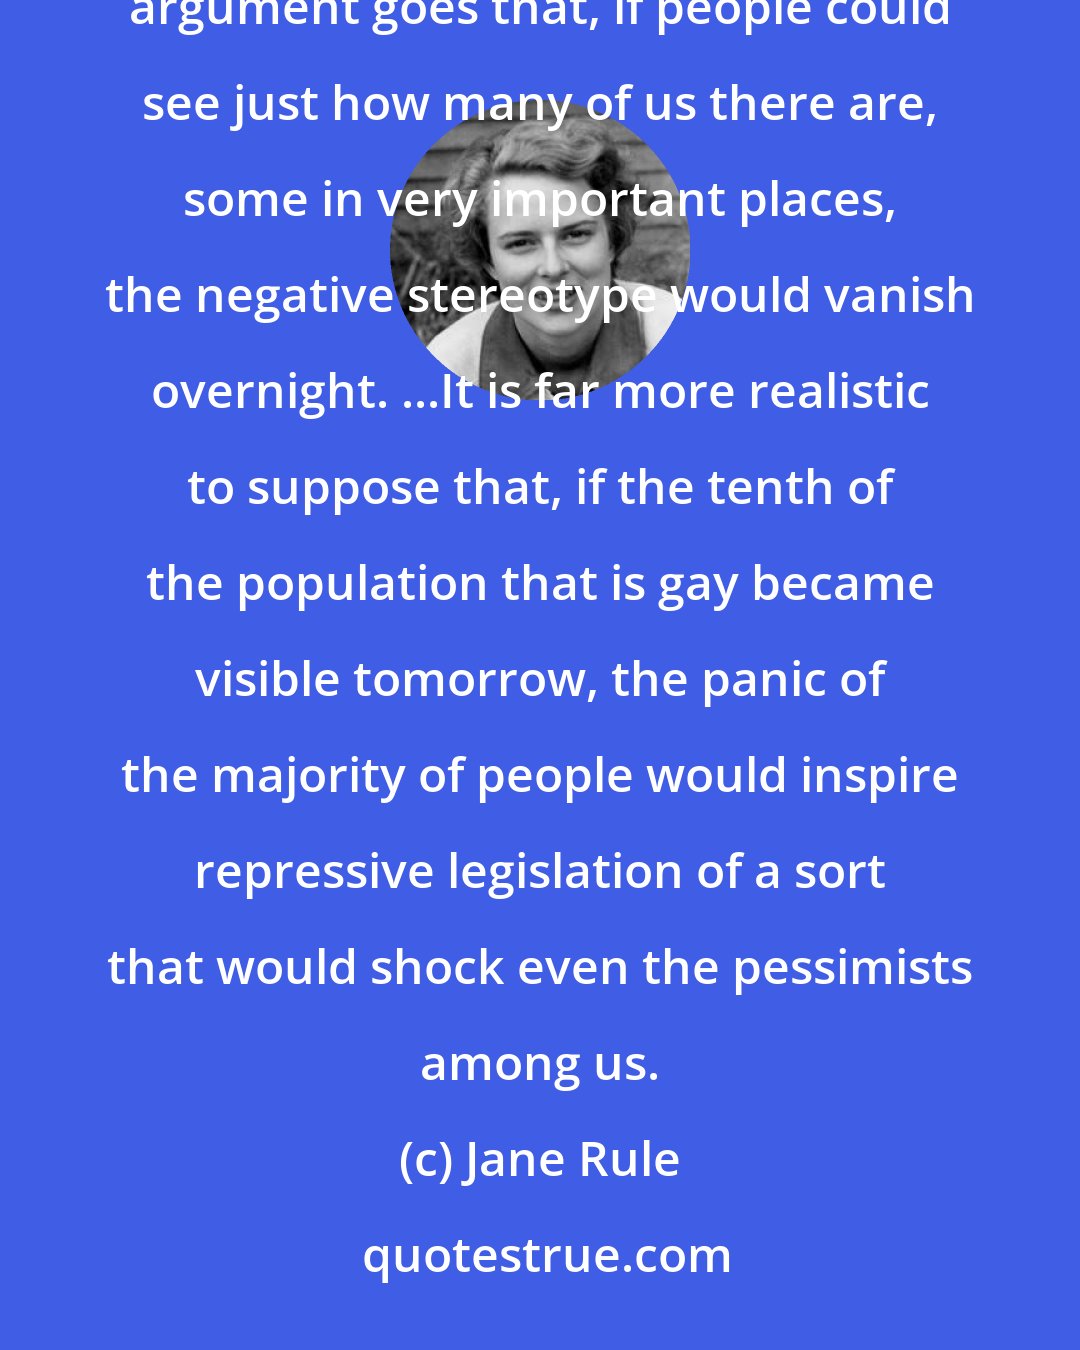 Jane Rule: Coming out, all the way out, is offered more and more as the political solution to our oppression. The argument goes that, if people could see just how many of us there are, some in very important places, the negative stereotype would vanish overnight. ...It is far more realistic to suppose that, if the tenth of the population that is gay became visible tomorrow, the panic of the majority of people would inspire repressive legislation of a sort that would shock even the pessimists among us.